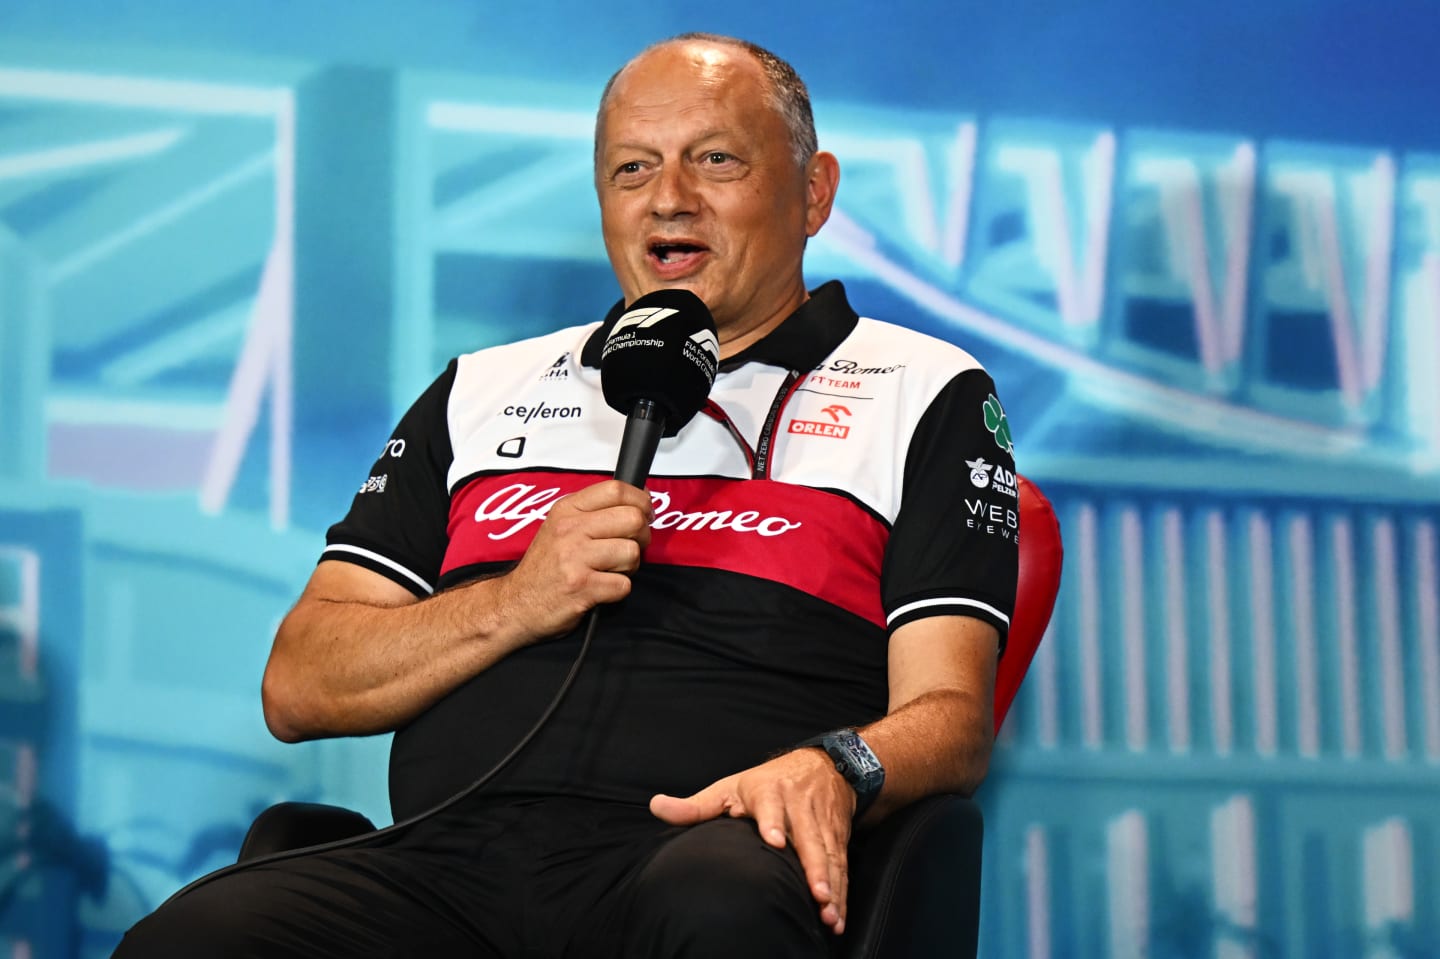 MIAMI, FLORIDA - MAY 07: Alfa Romeo Racing Team Principal Frederic Vasseur talks in the Team Principals Press Conference prior to final practice ahead of the F1 Grand Prix of Miami at the Miami International Autodrome on May 07, 2022 in Miami, Florida. (Photo by Clive Mason/Getty Images)